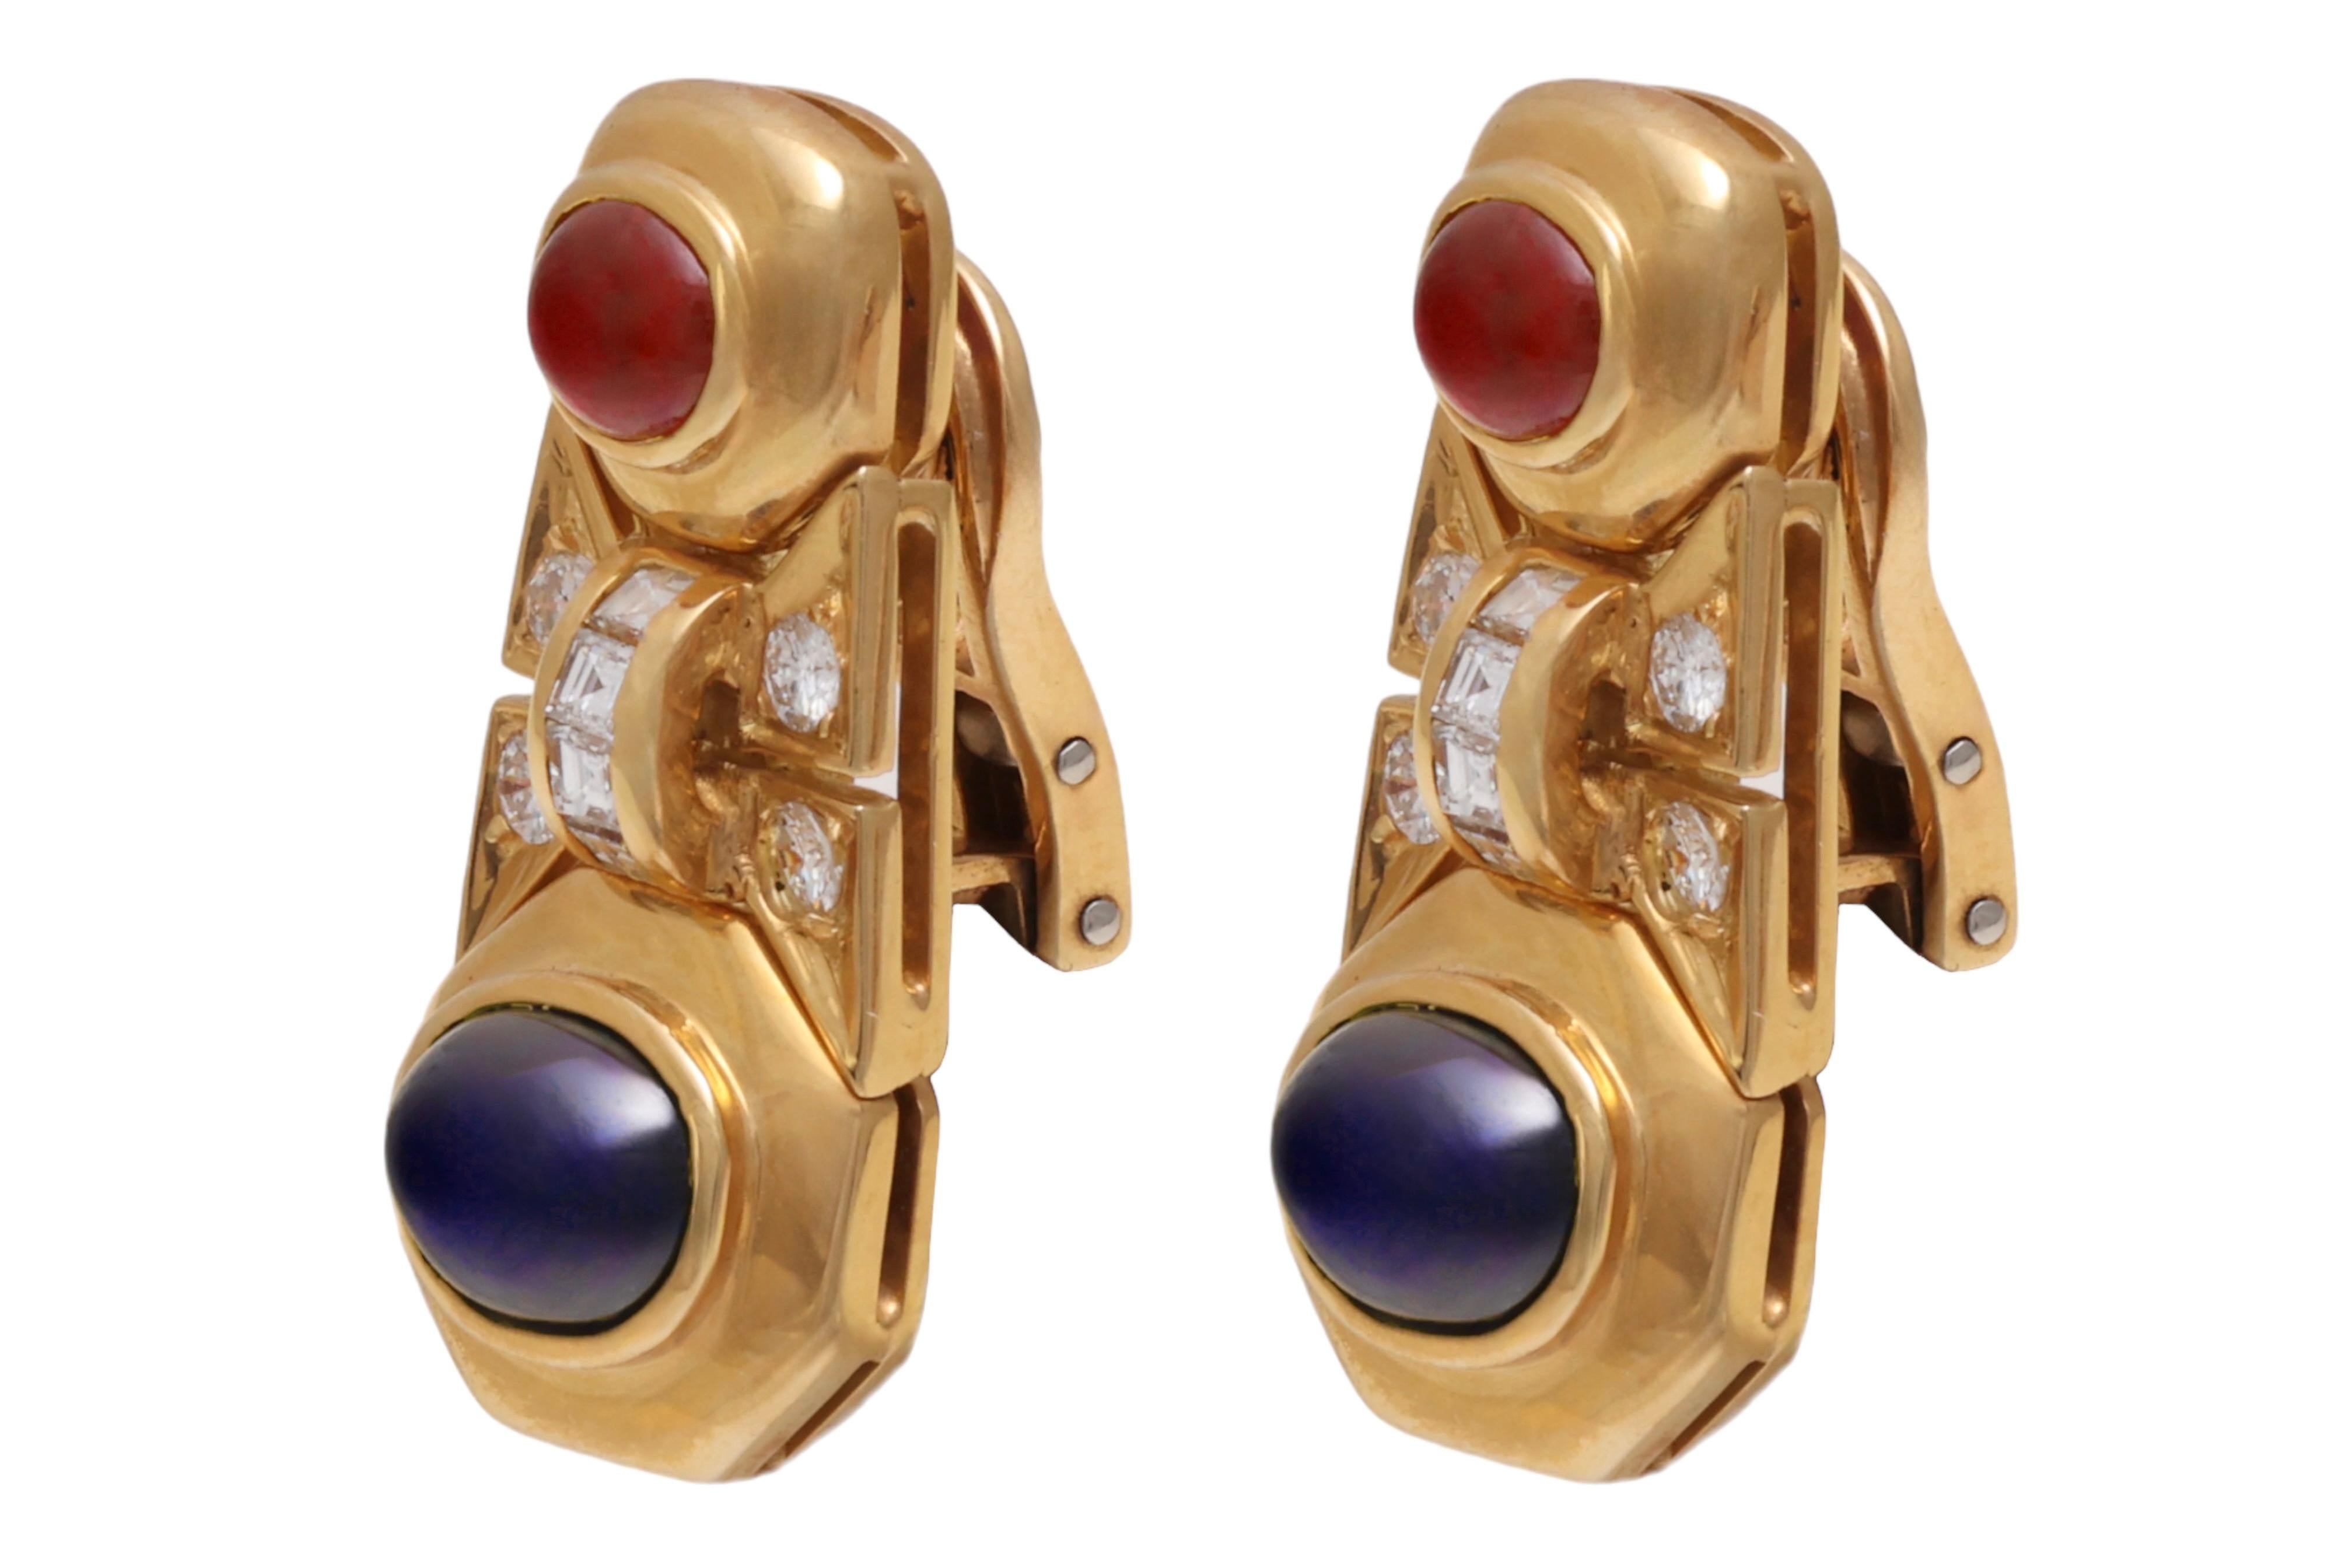 Gorgeous 18 kt. Yellow Gold Clip-On Earrings With Cabochon Sapphire and Ruby and Diamonds 

Ruby: 2 cabochon cut rubies

Sapphire: 2 cabochon Sapphires

Diamonds: Brilliant cut and square cut diamonds together 0.72 ct.

Material: 18 kt yellow